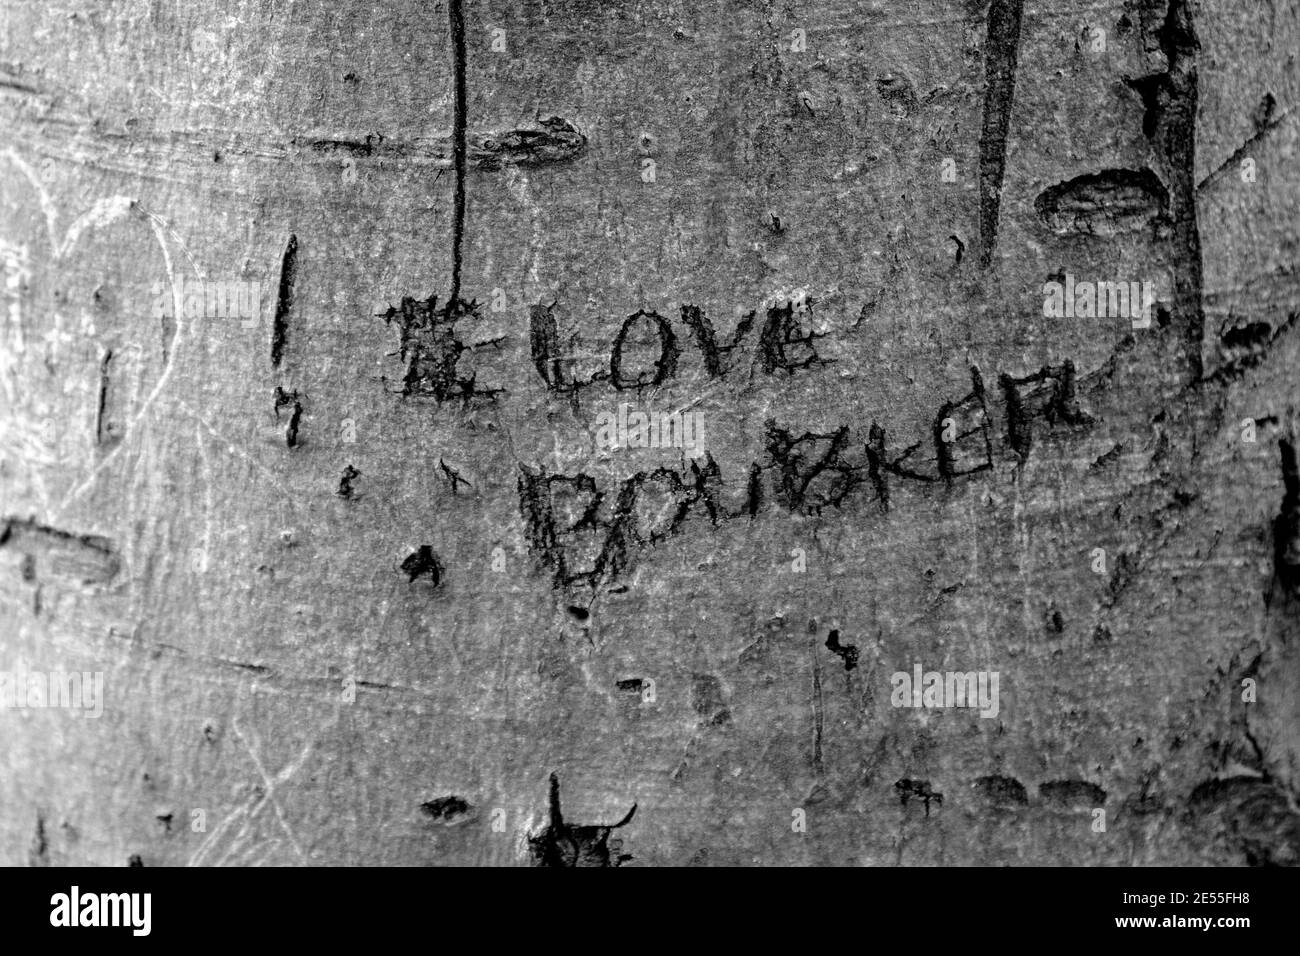 Text Carved In A Tree At Amsterdam The Netherlands 26-6-2020 Stock Photo